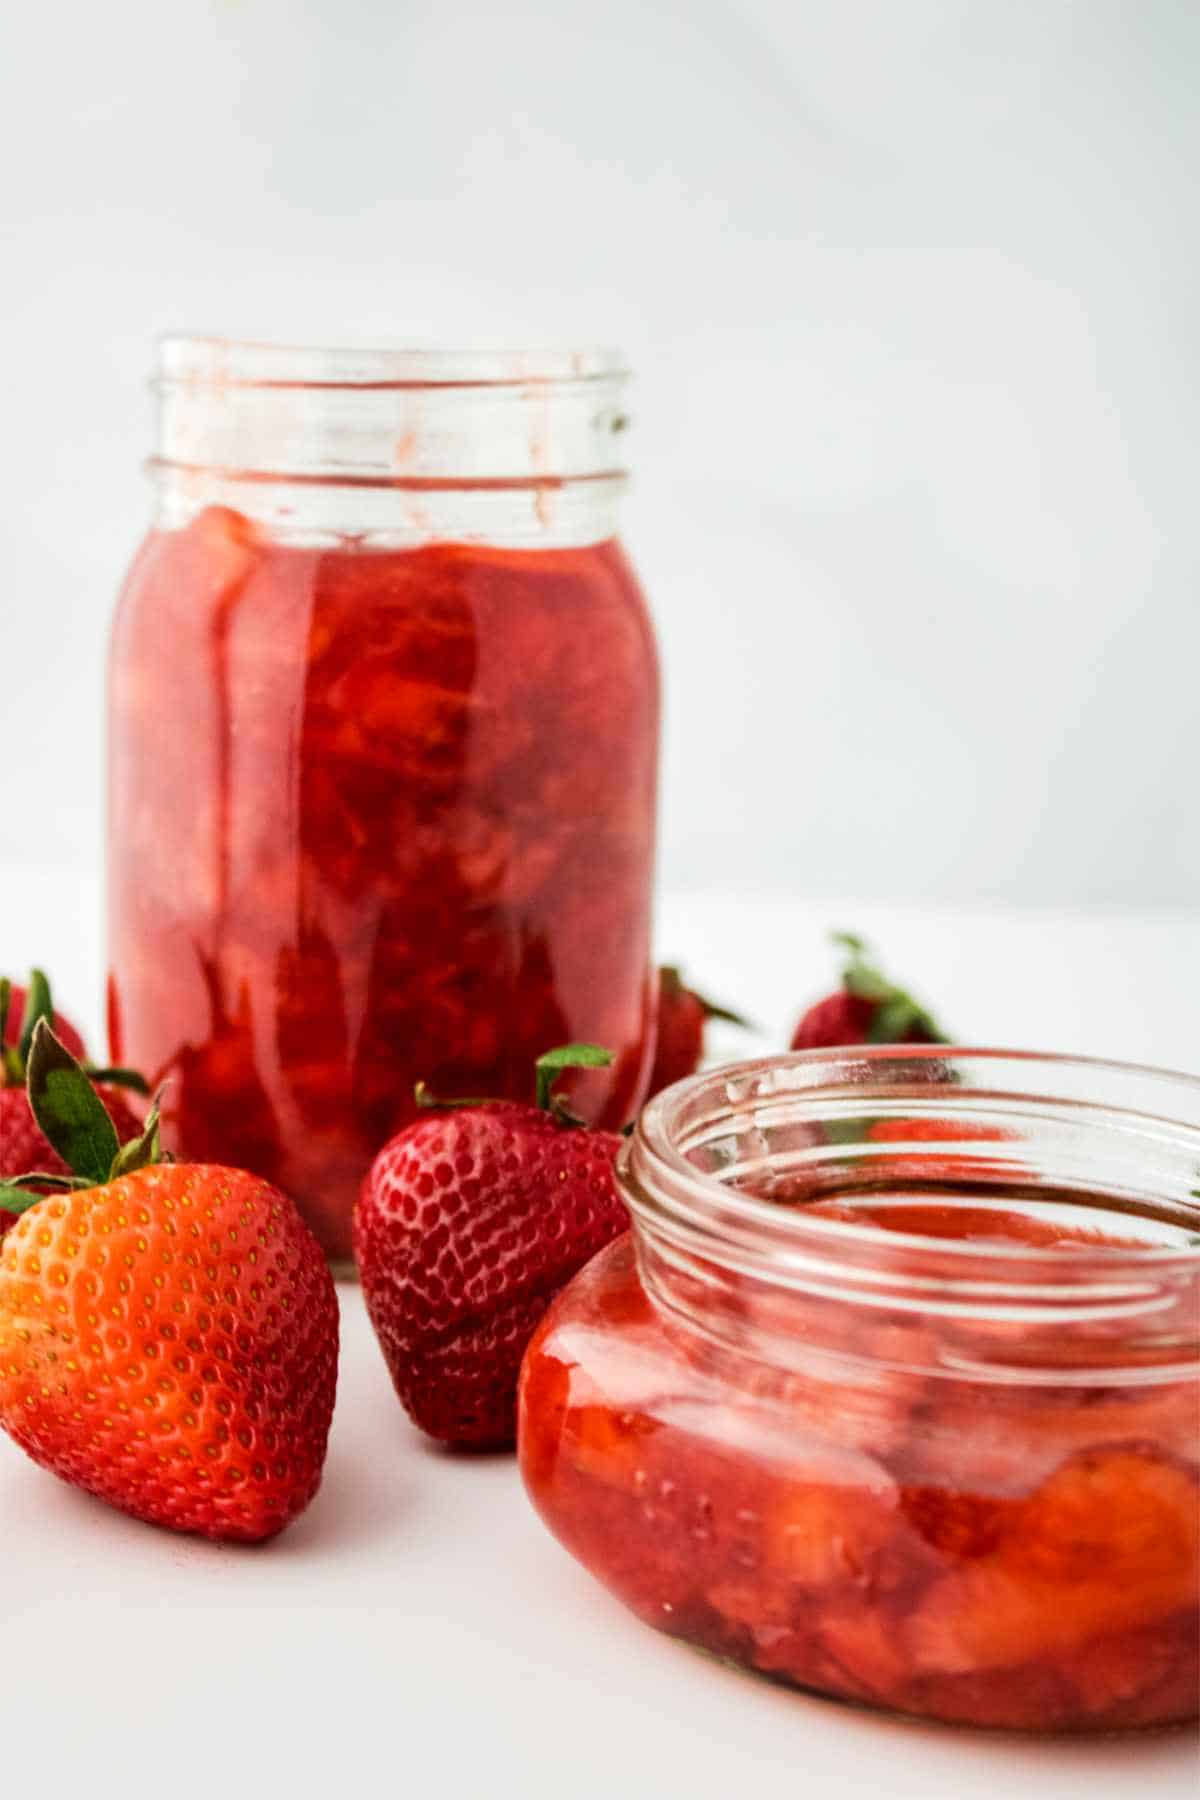 jars of strawberry jam without pectin on a white background.